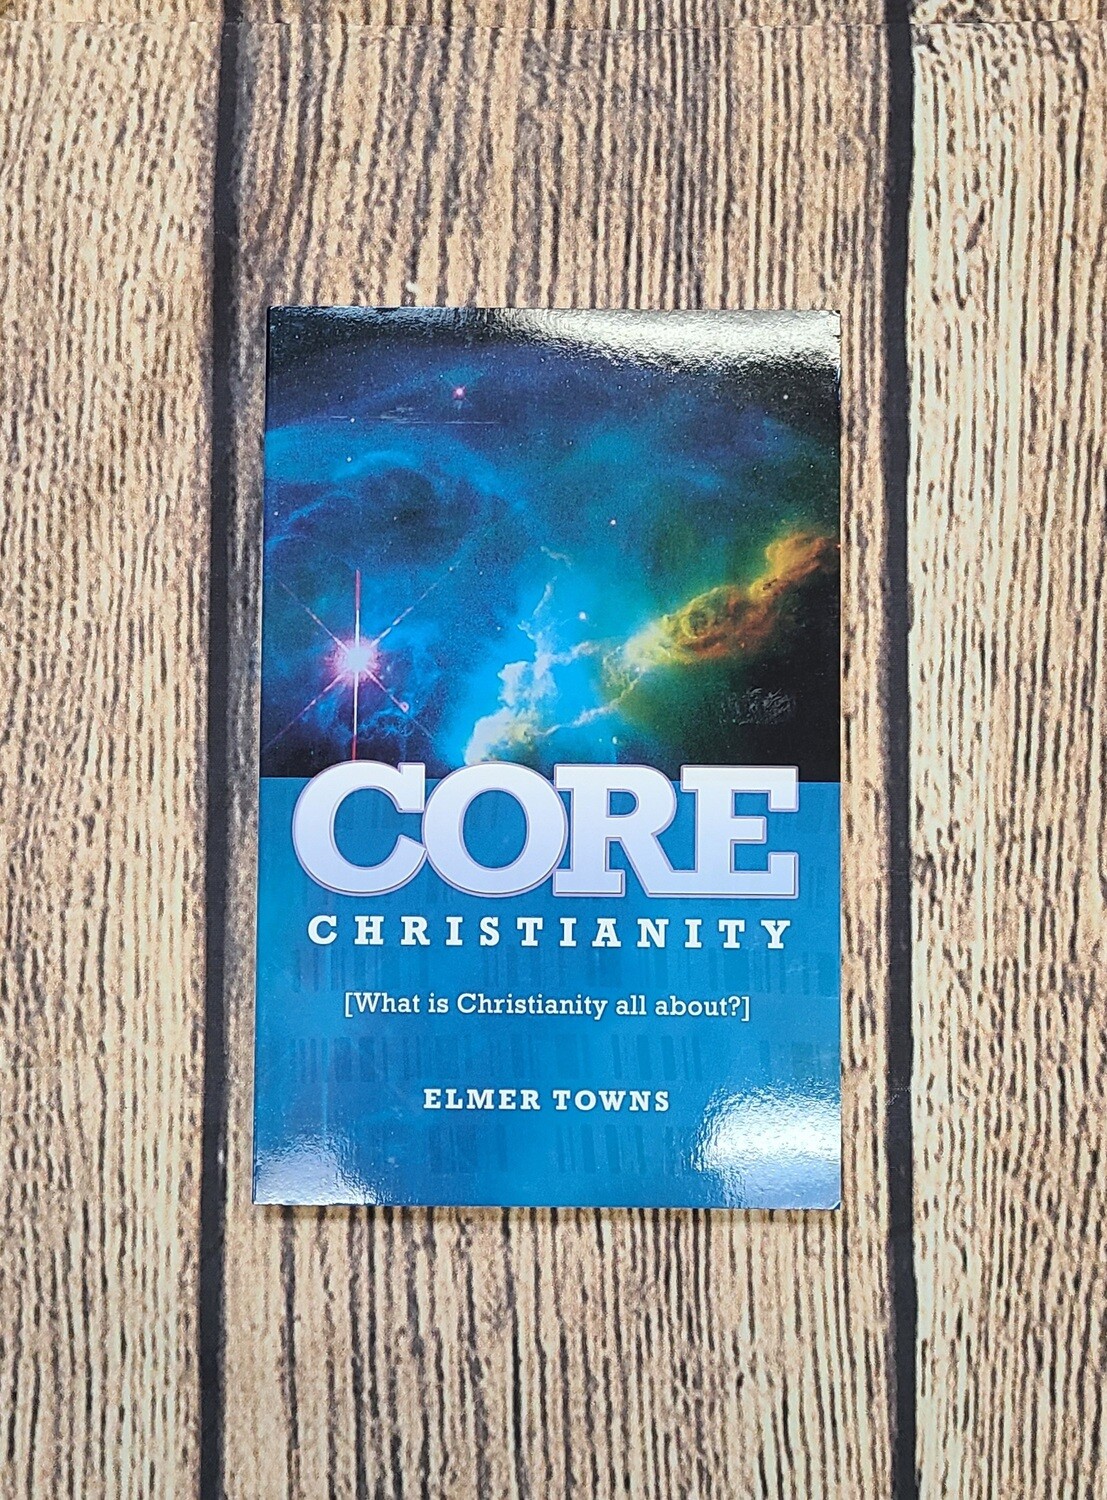 Core Christianity by Elmer Towns